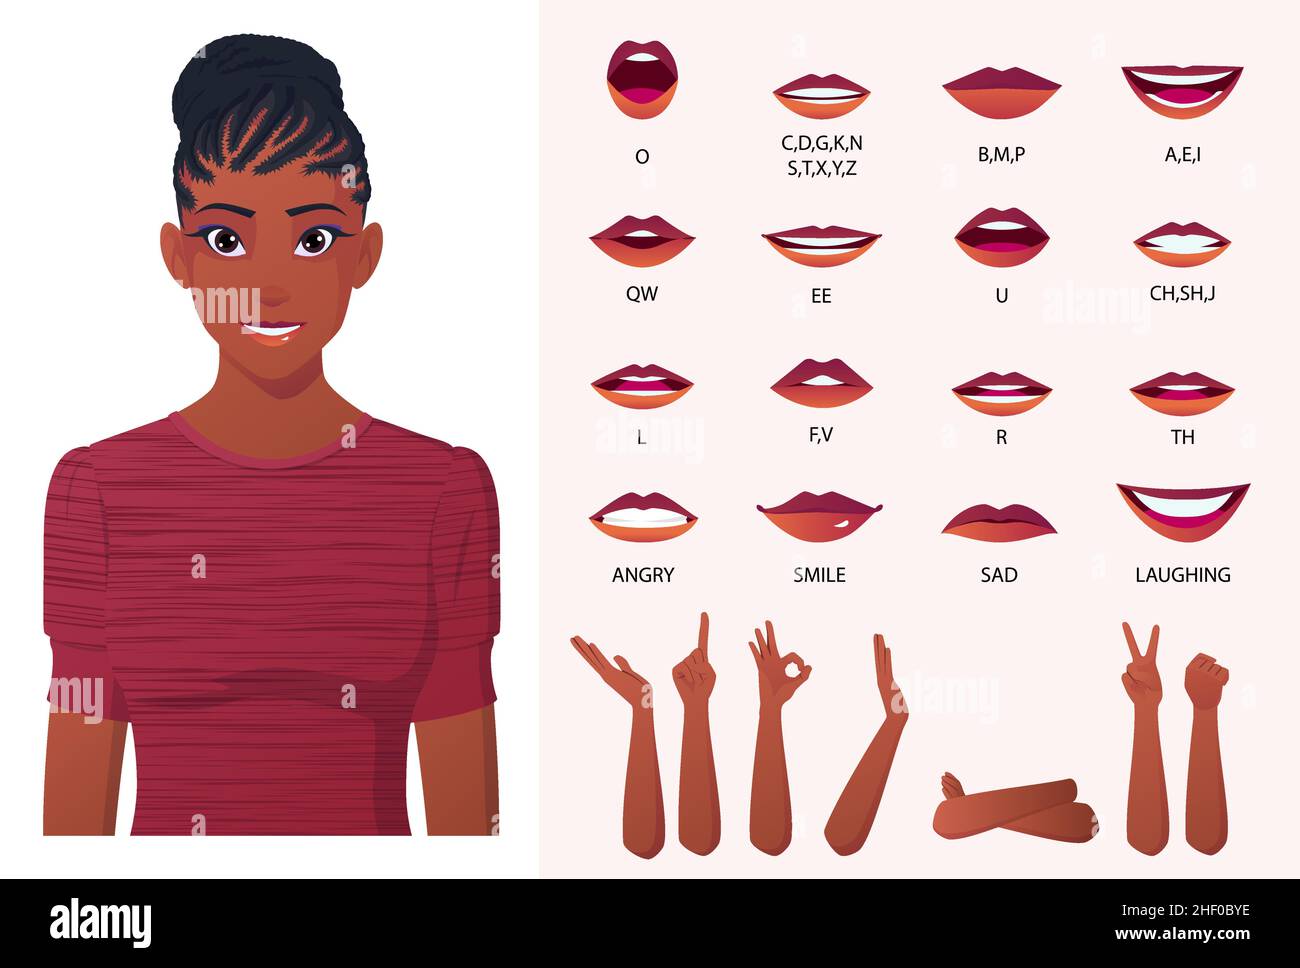 African American Black Woman Mouth Animation and Lip Sync Creation, Woman with braids hairstyle Illustrazione Vettoriale